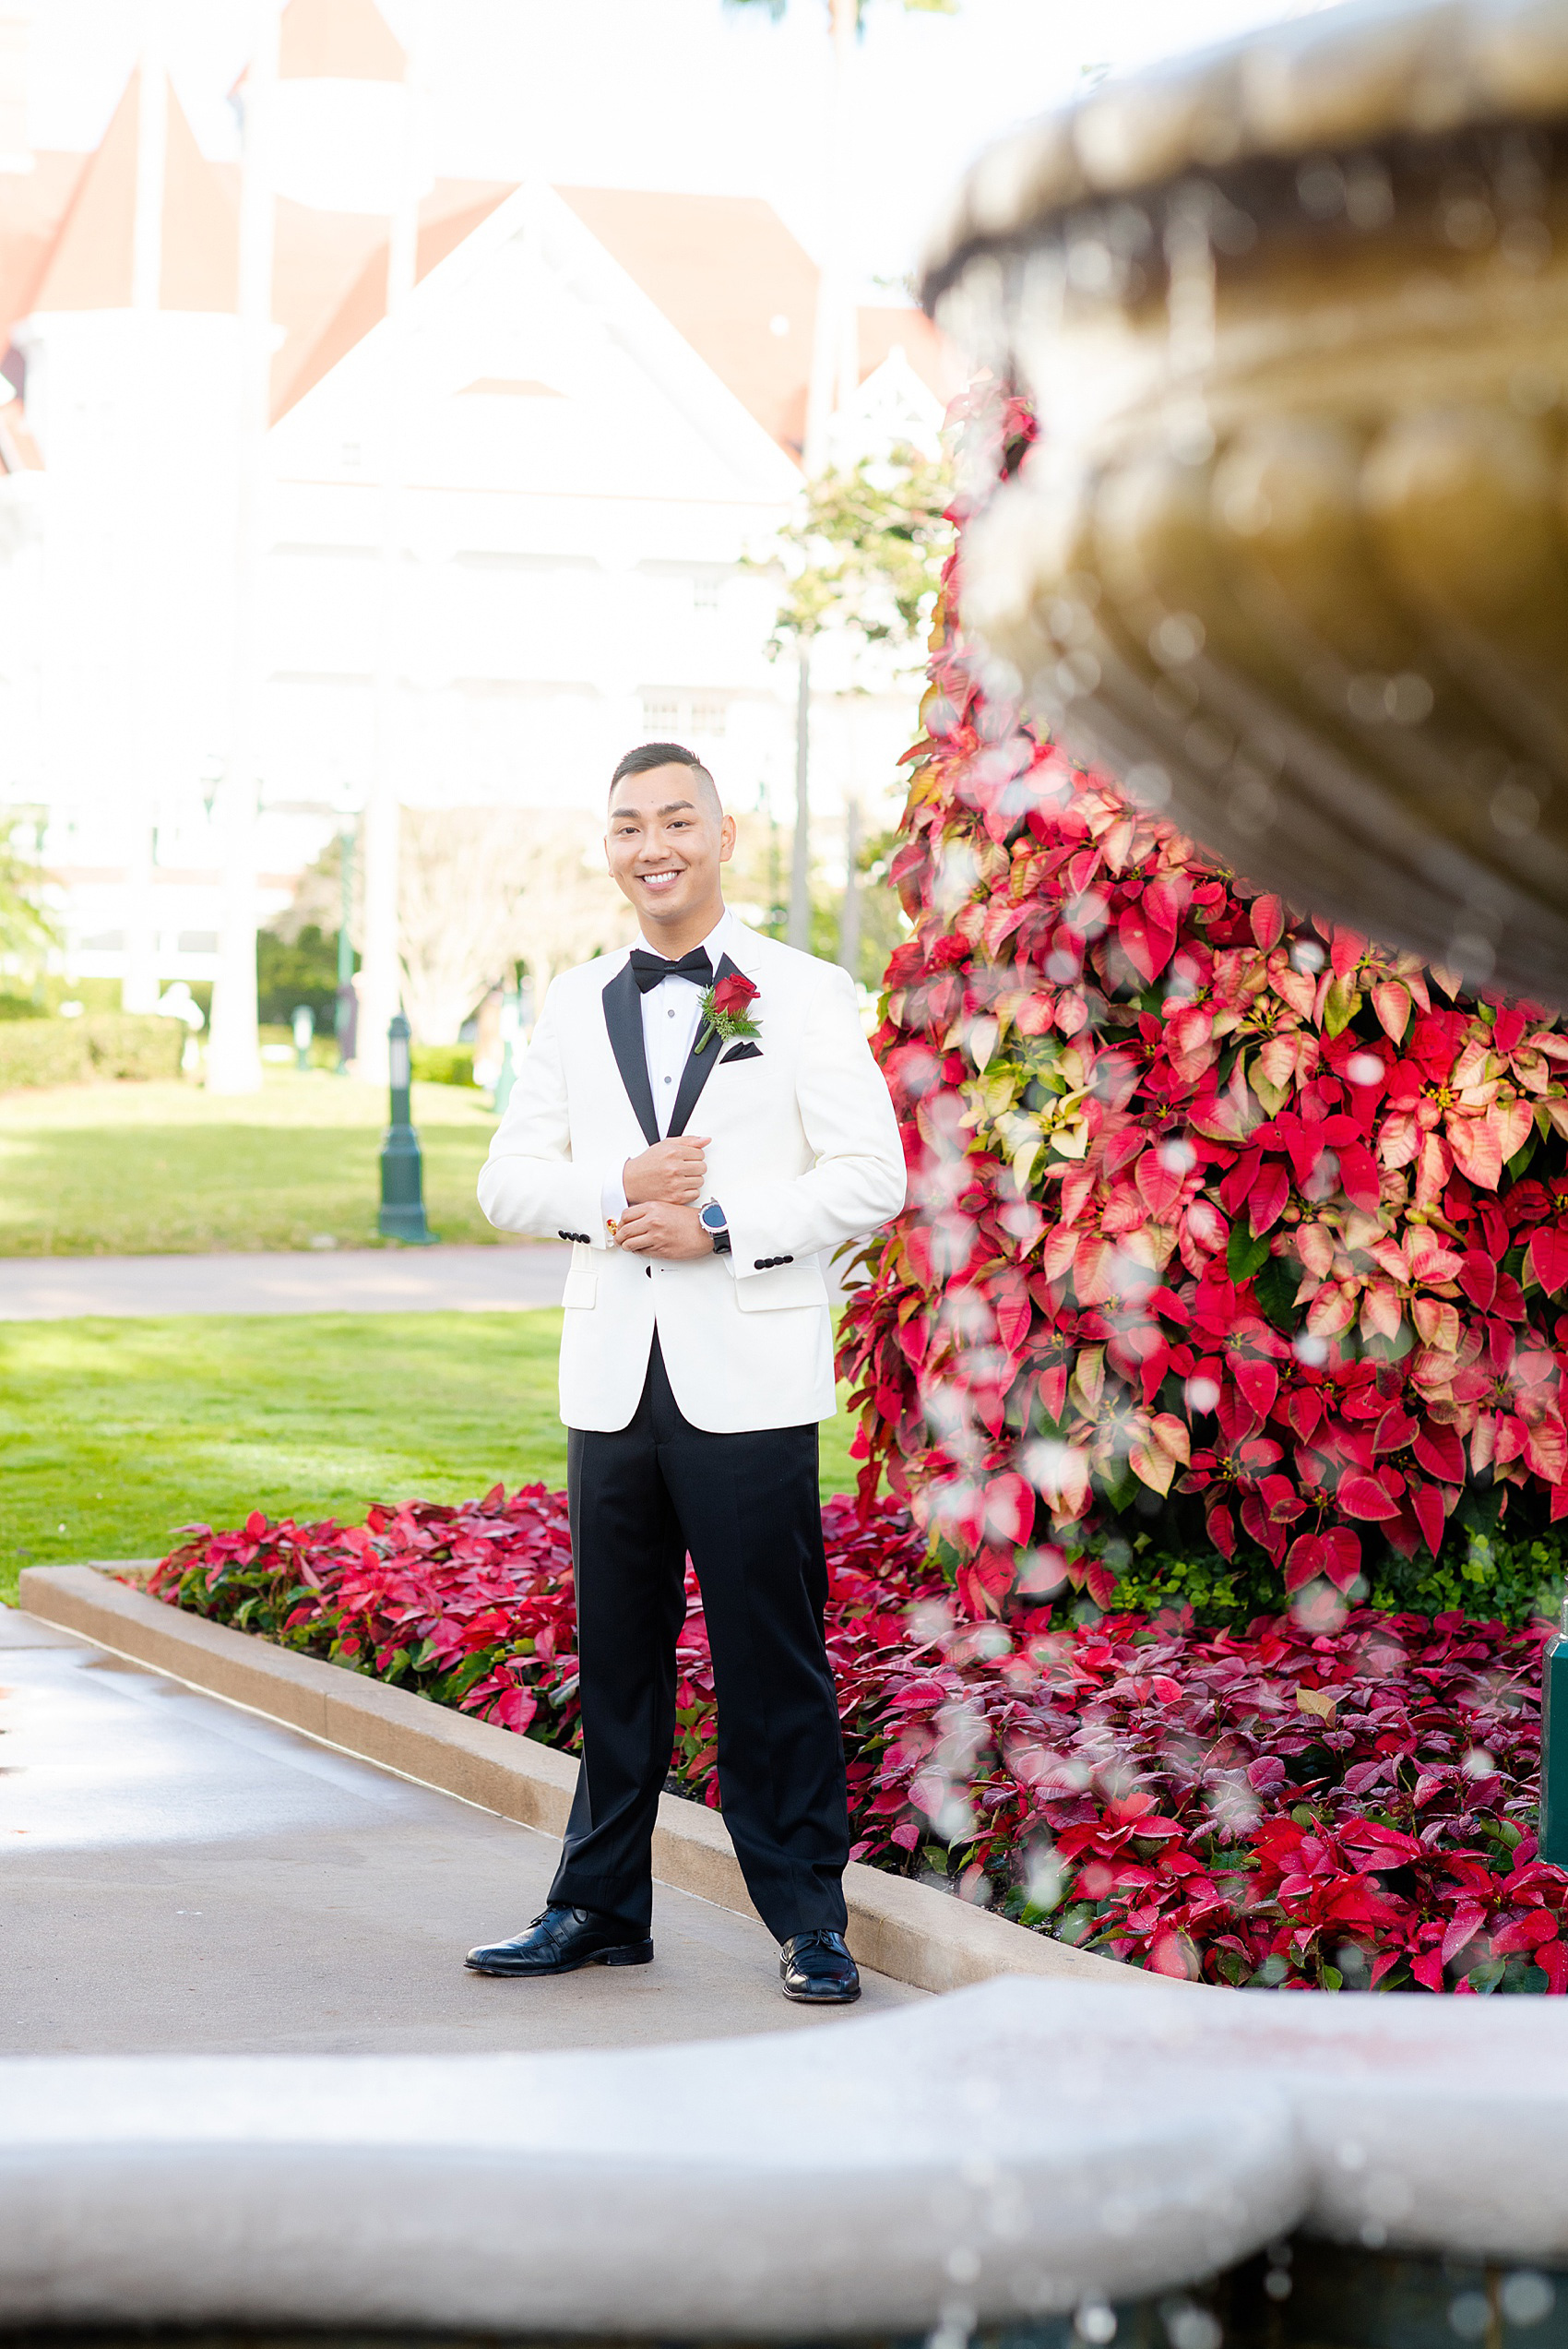 Photographs of a Walt Disney World groom by Mikkel Paige Photography. As a lover of Marvel comics, he wove a small detail from Iron Man into his white tuxedo with gold and red cufflinks. He got ready for his day at the dream resort, the Grand Floridian, with his groomsmen and wore a red rose boutonniere for his bride’s love of a Beauty and the Beast theme. #disneywedding #disneybride #waltdisneyworld #DisneyWorldWedding